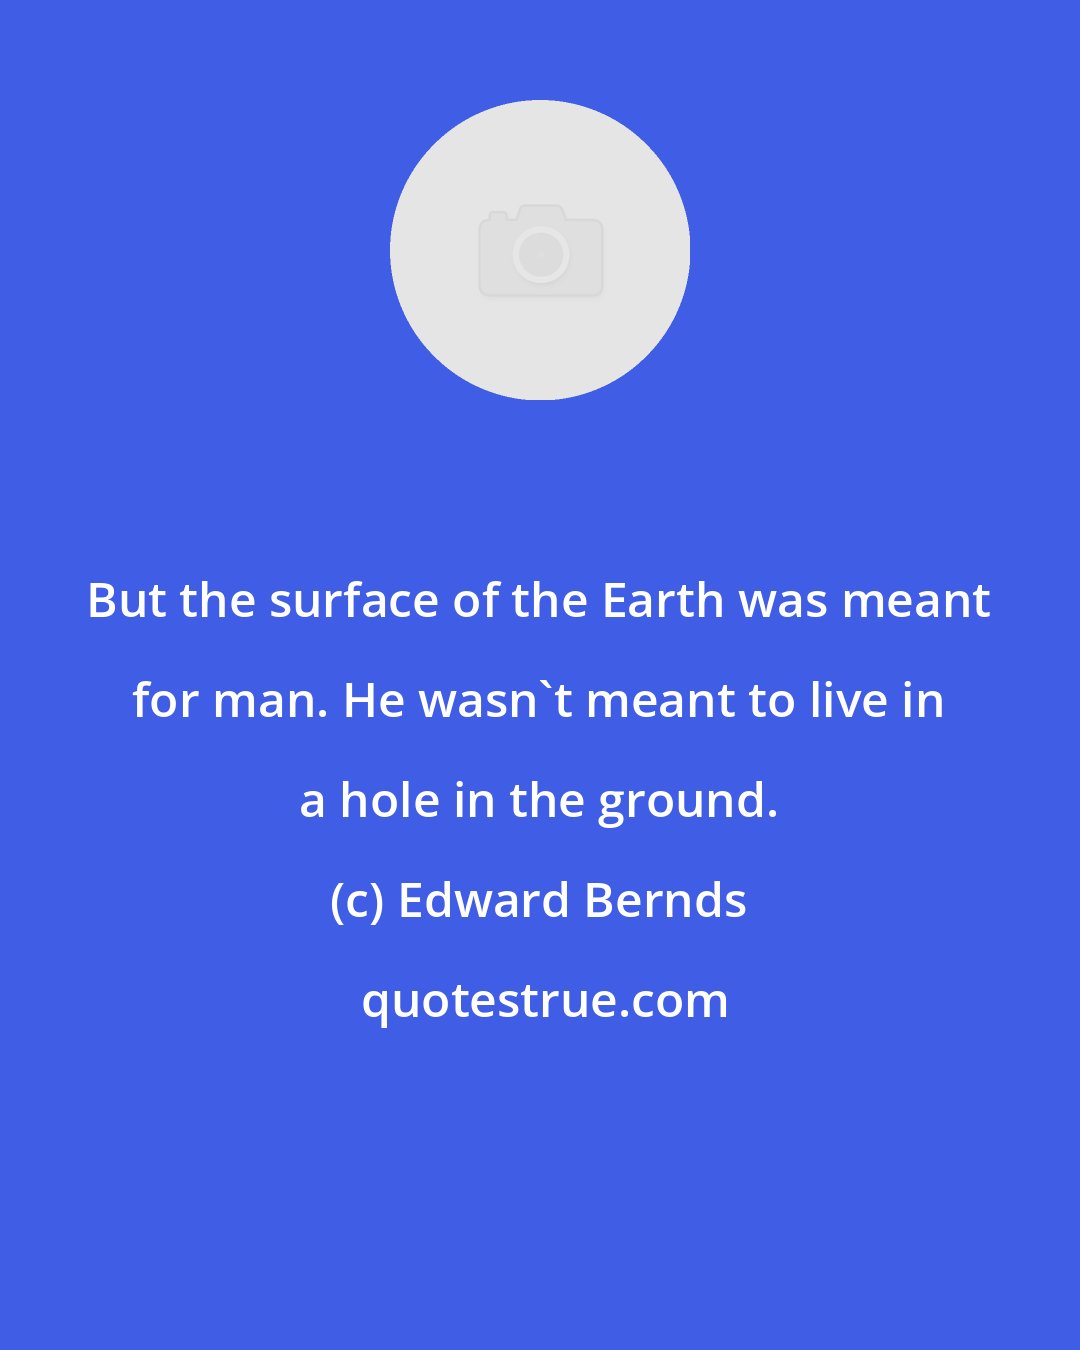 Edward Bernds: But the surface of the Earth was meant for man. He wasn't meant to live in a hole in the ground.